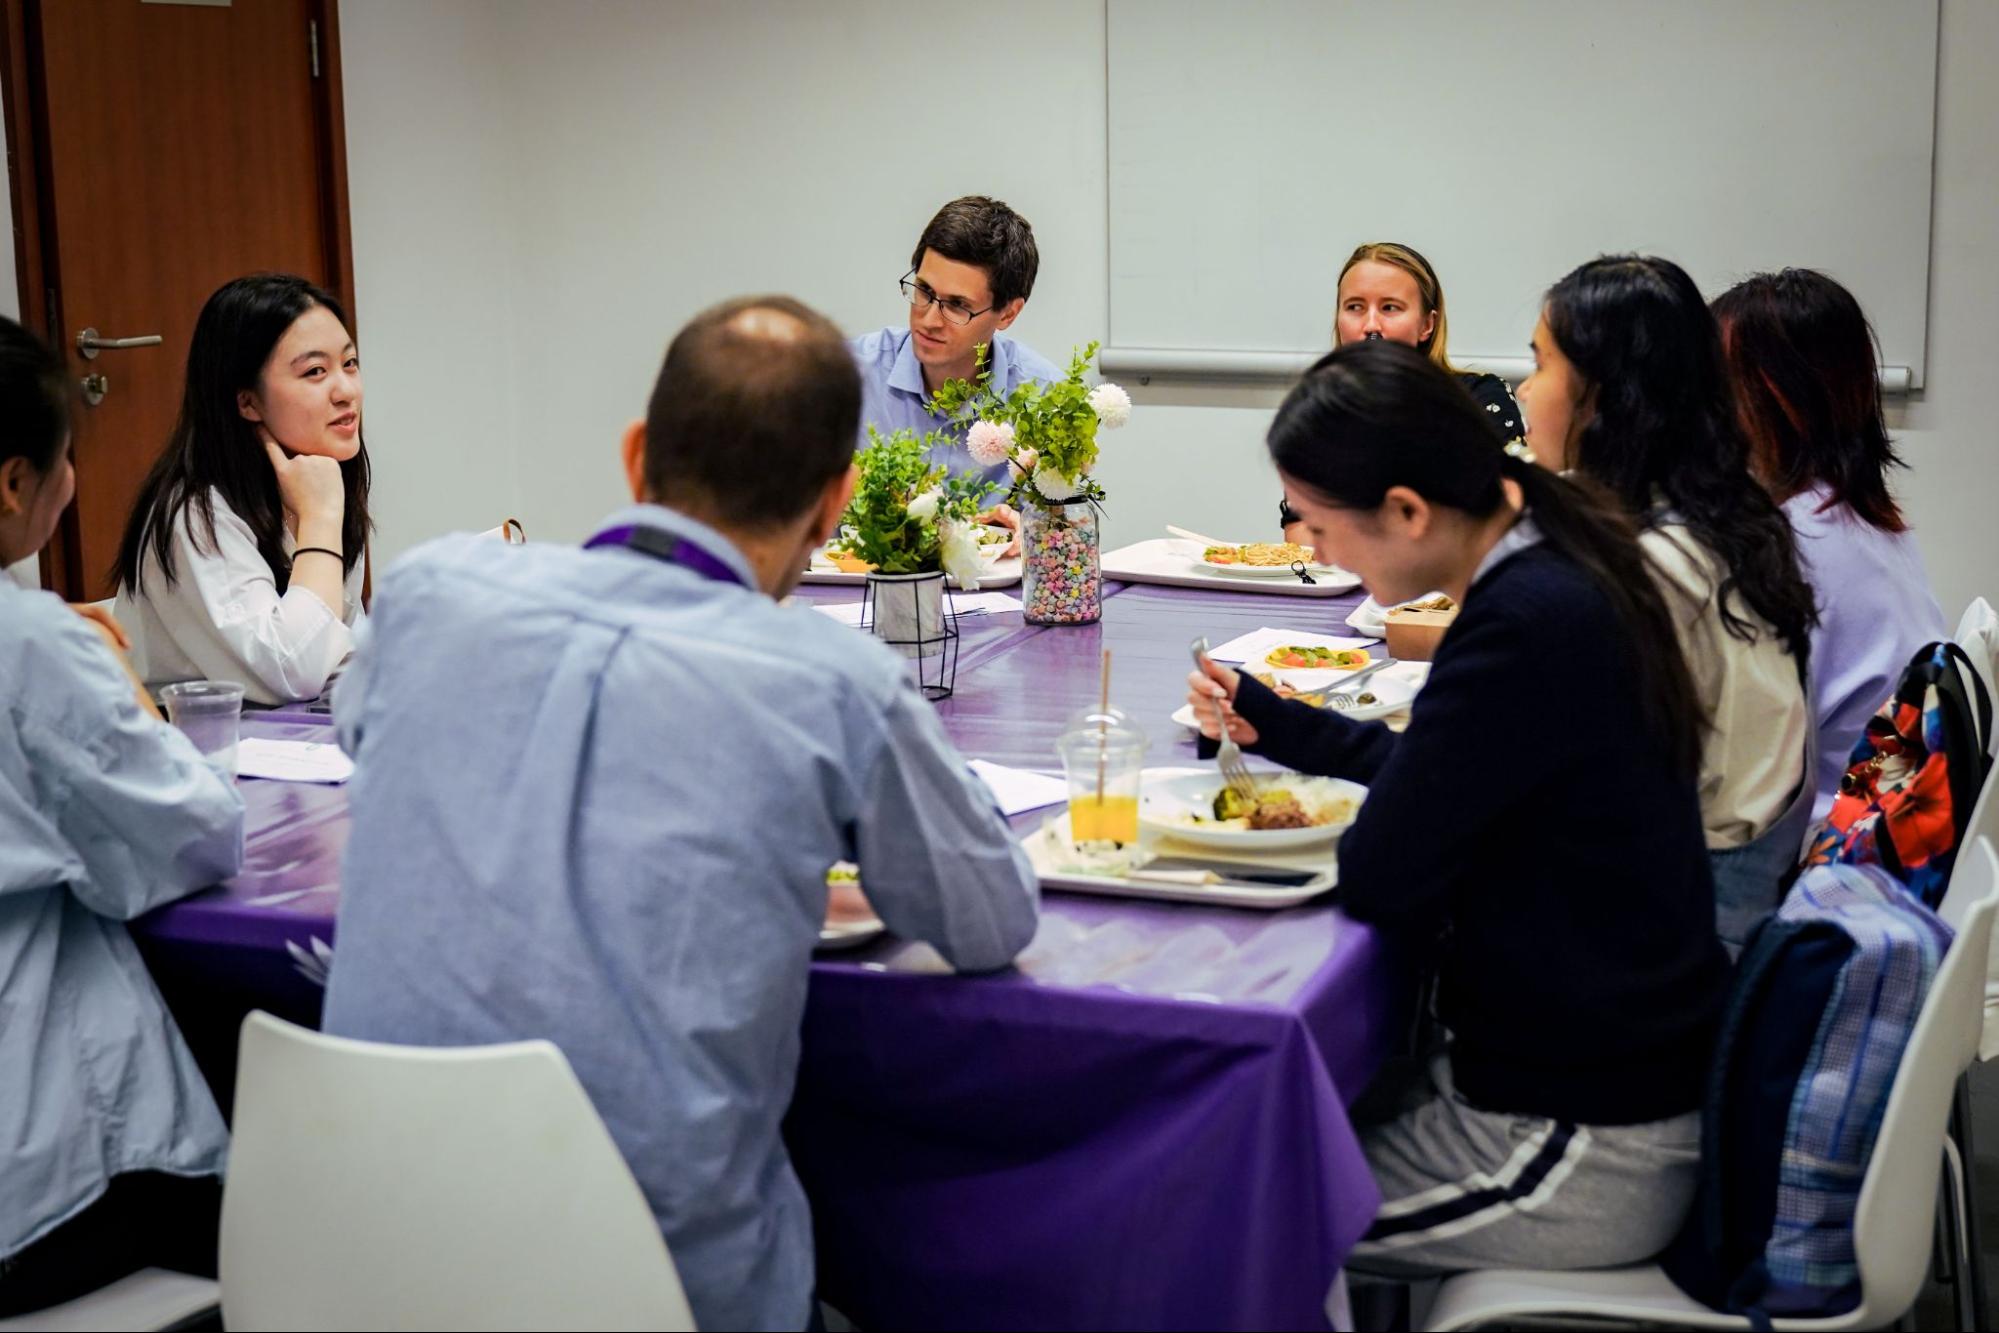 Students and professors seated at a table for lunch and conversation